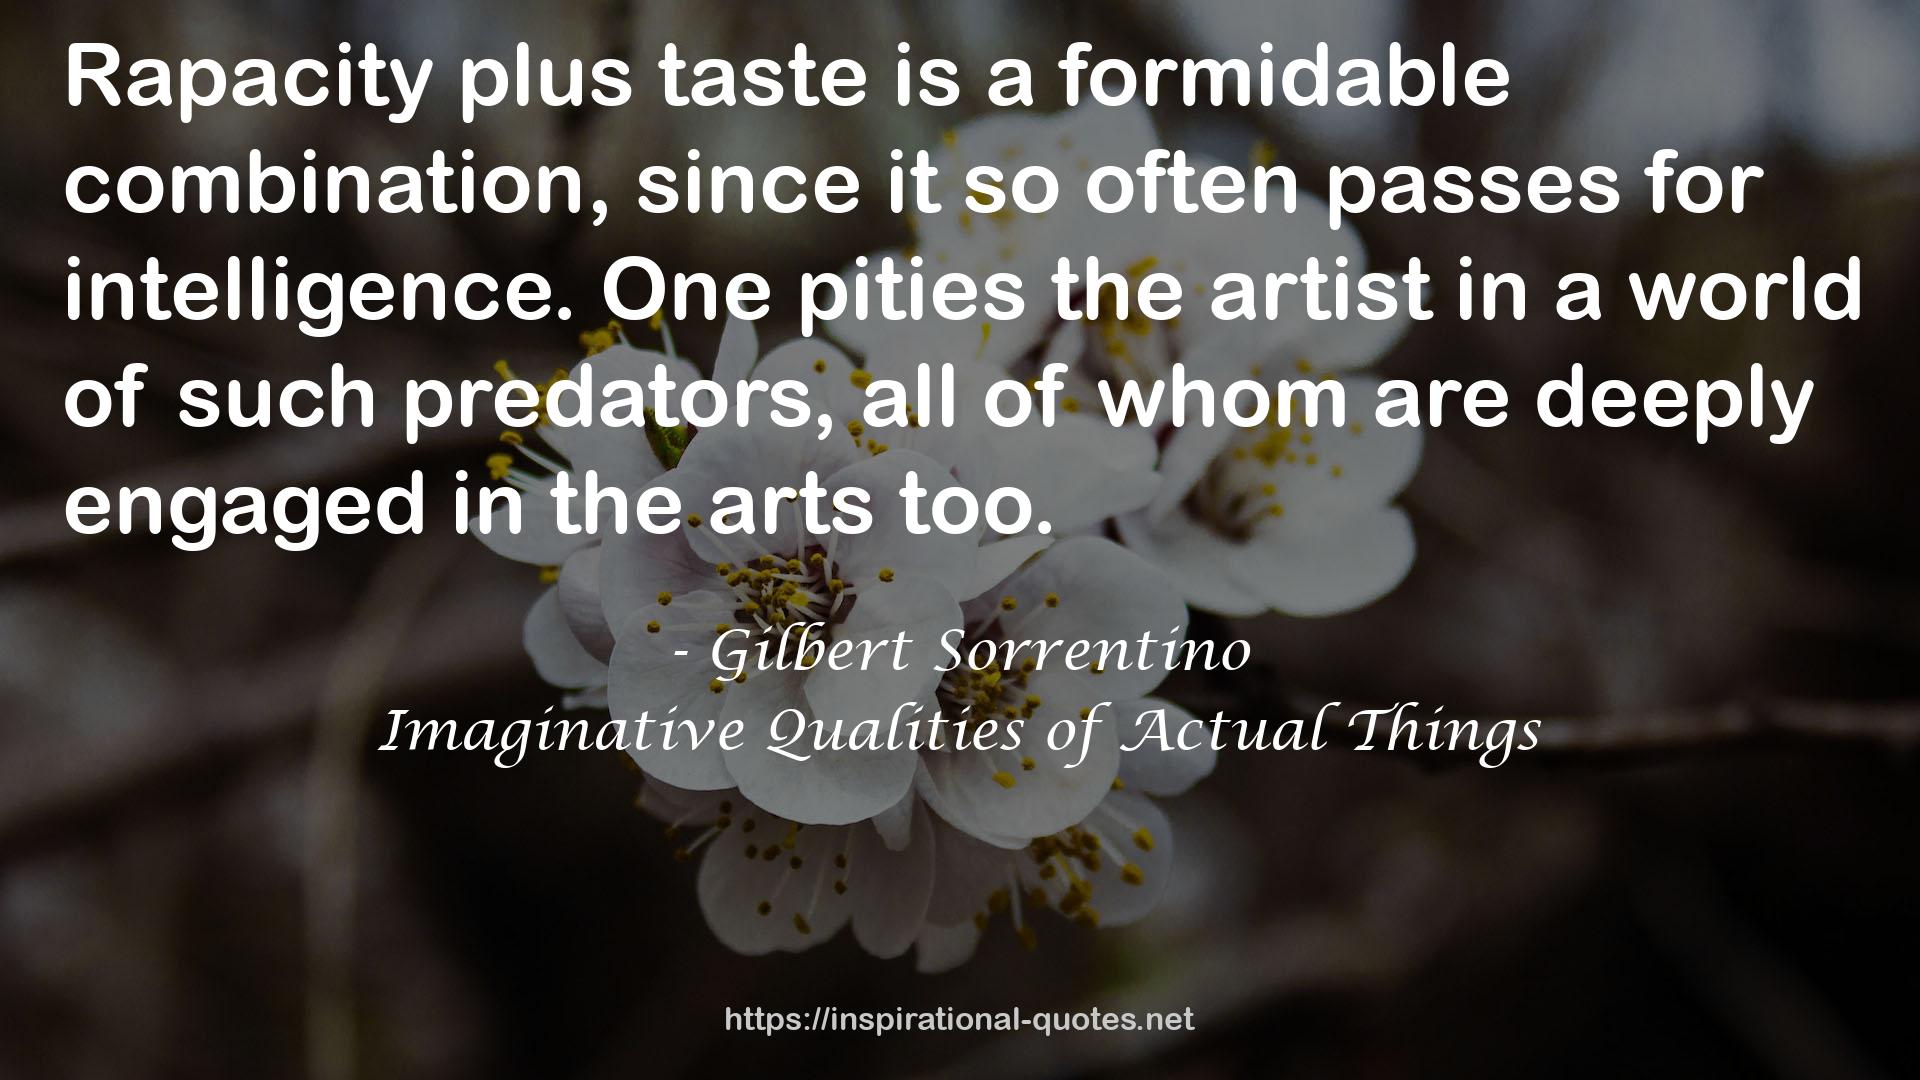 Imaginative Qualities of Actual Things QUOTES